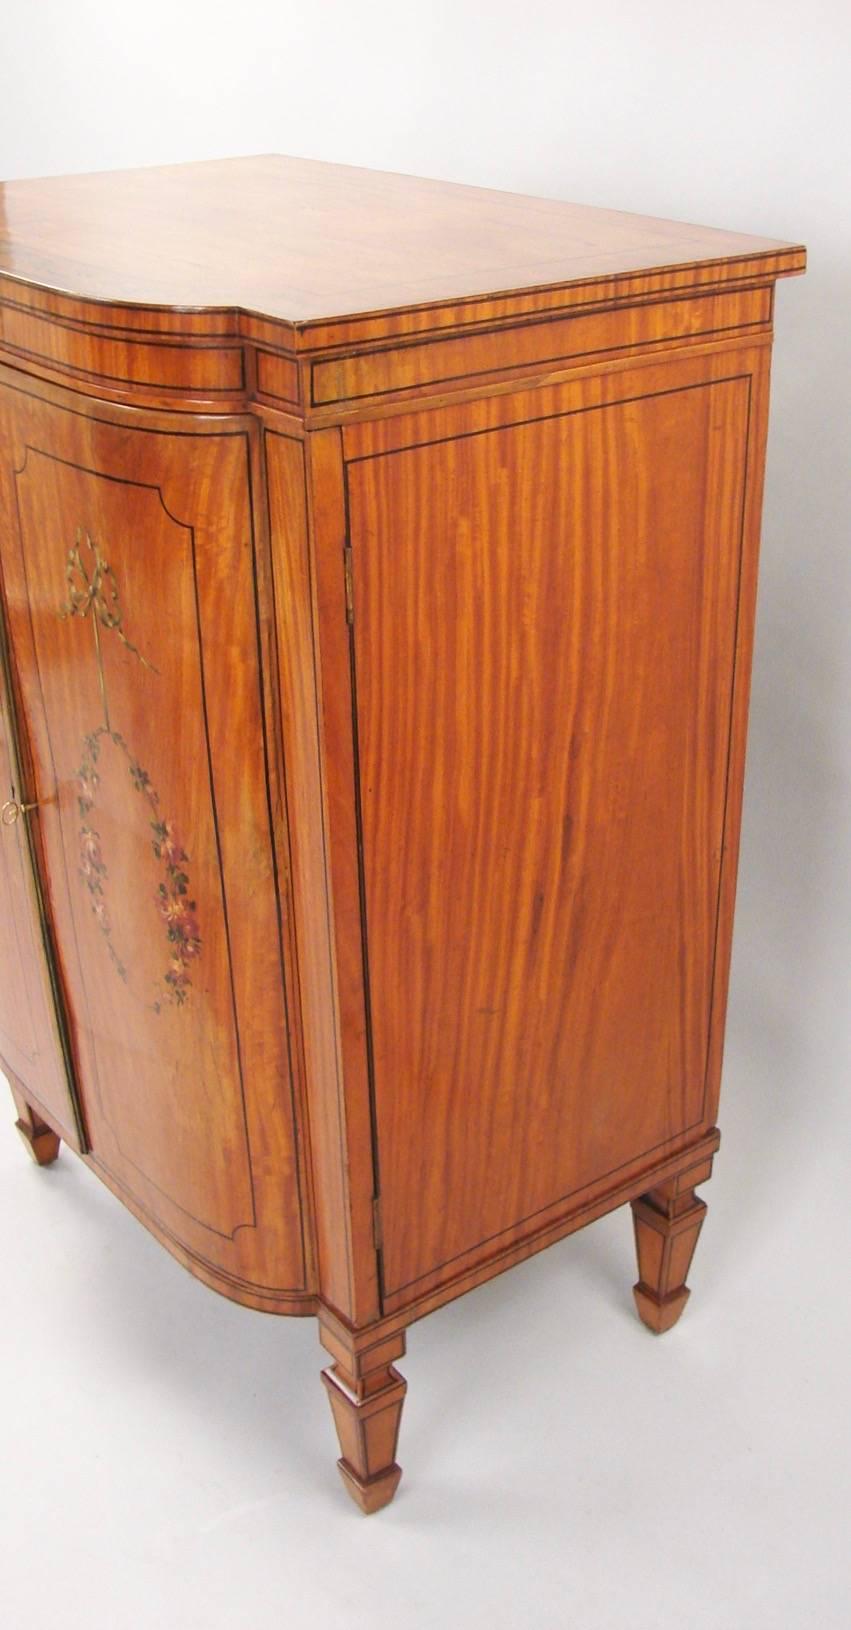 A good quality English Sheraton style satinwood line inlaid and paint decorated music cabinet, the case decorated with polychrome bows and floral garlands, the top with floral painted border, the doors opening to a single shaped shelf all raised on